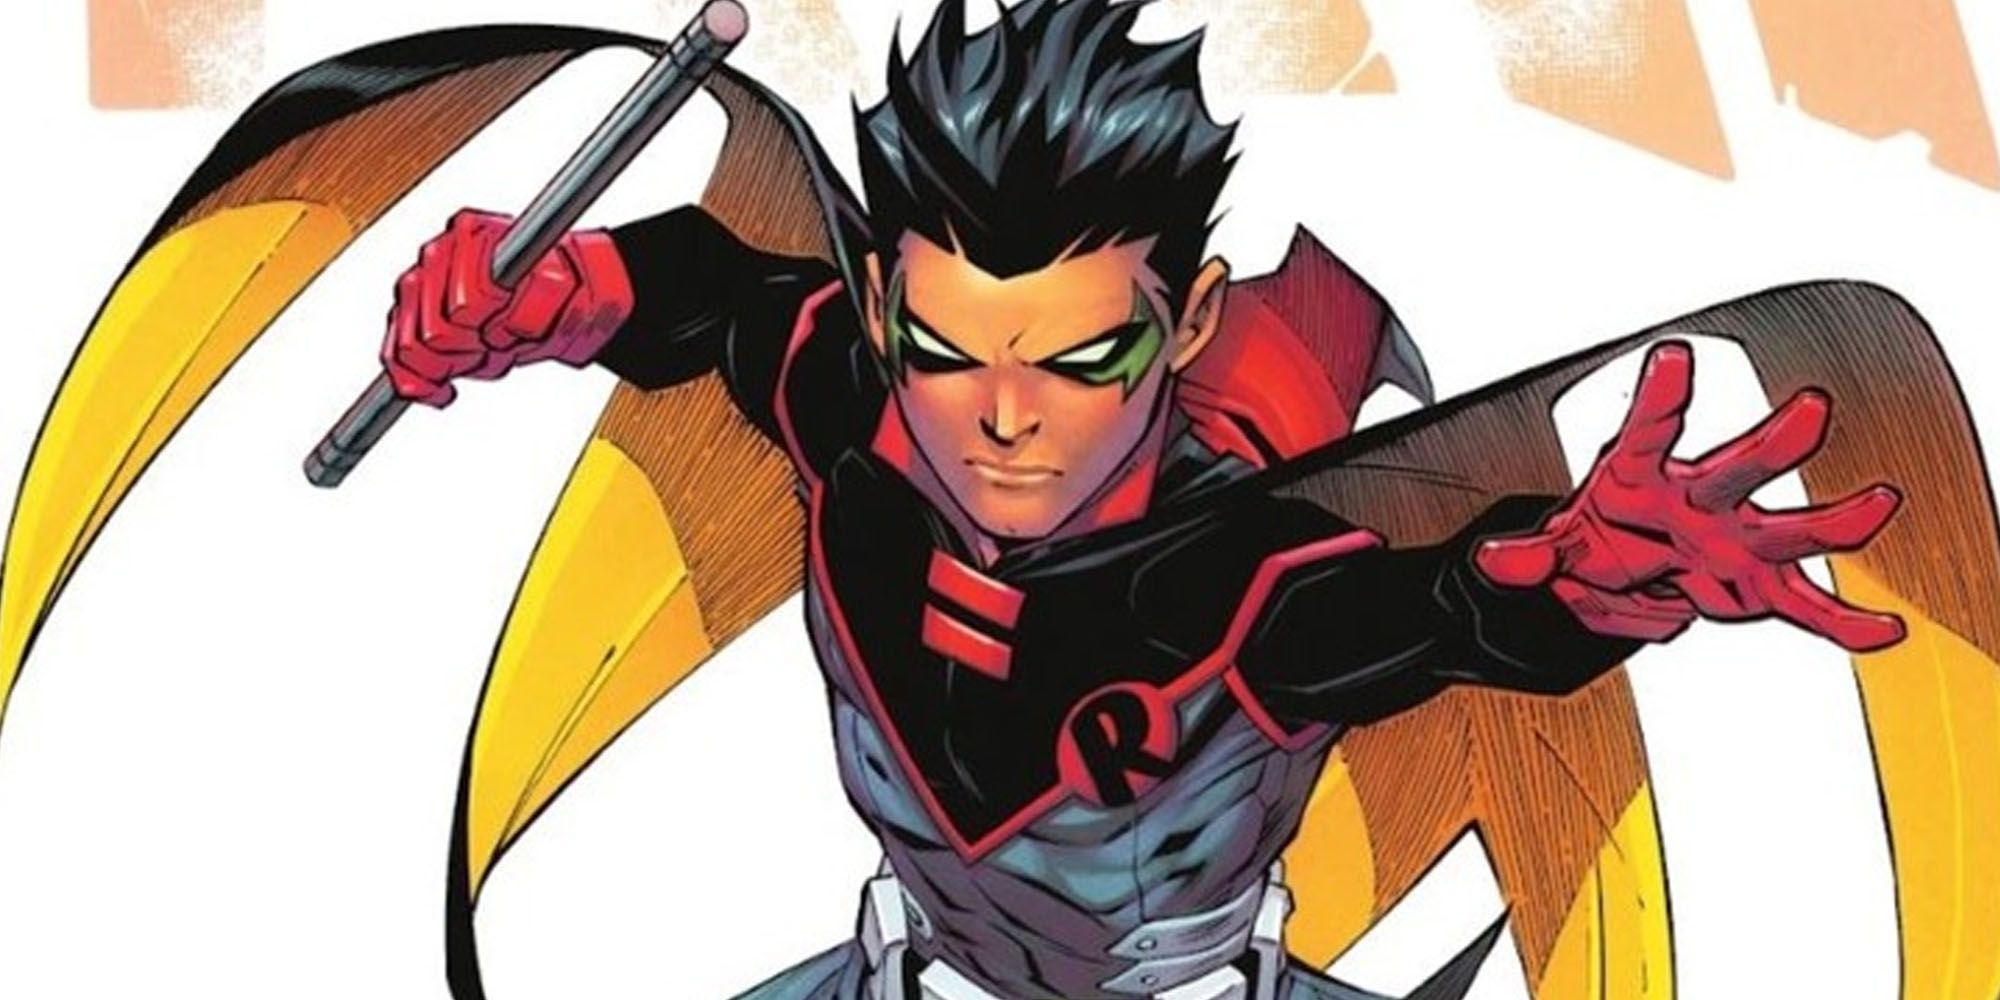 Damian Wayne over a white background leaping towards the camera